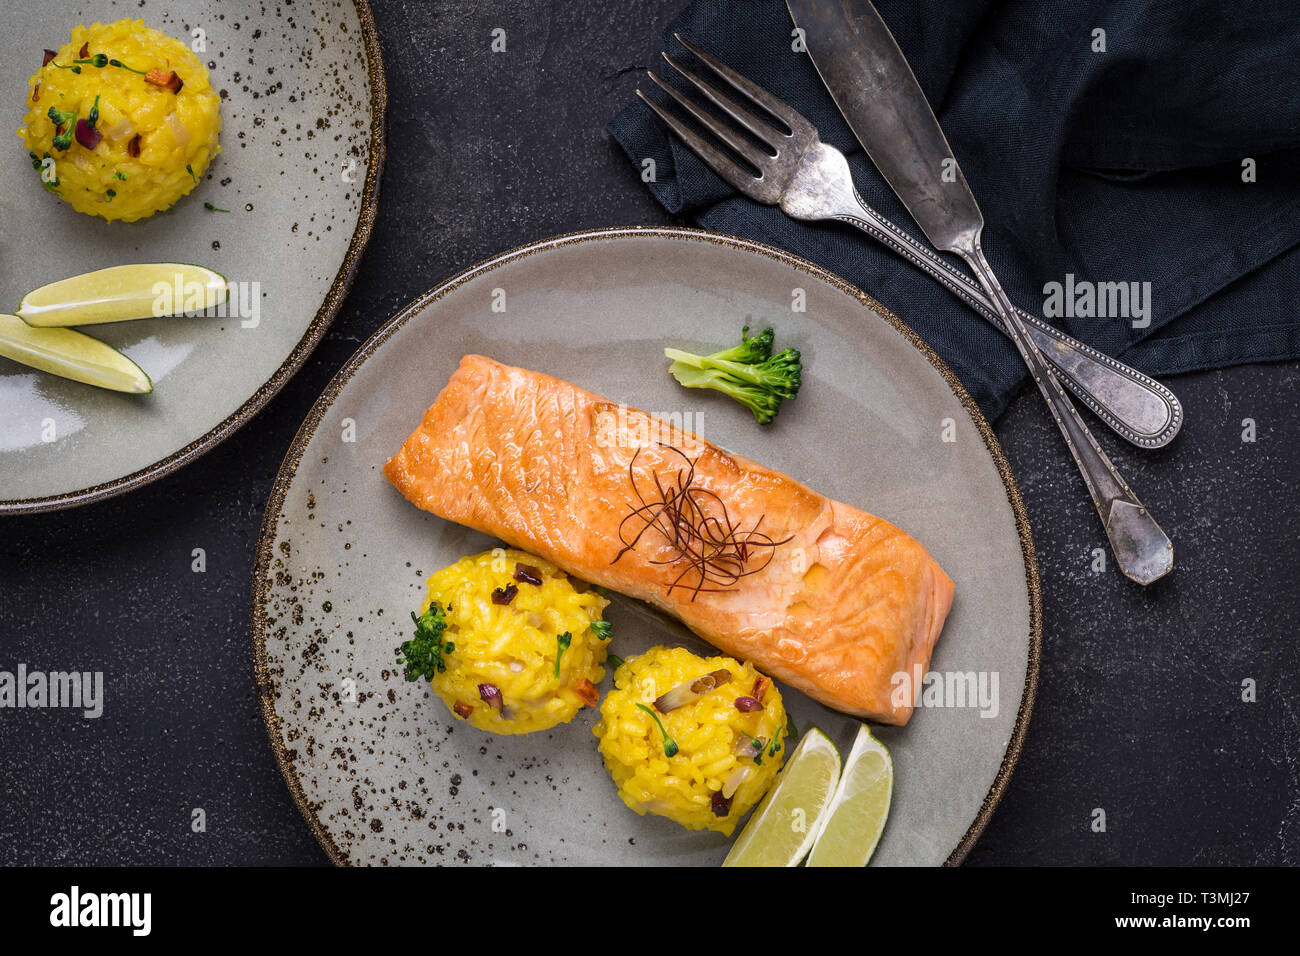 Grilled Salmon Fillet with Saffron Risotto on Dark Background Stock Photo